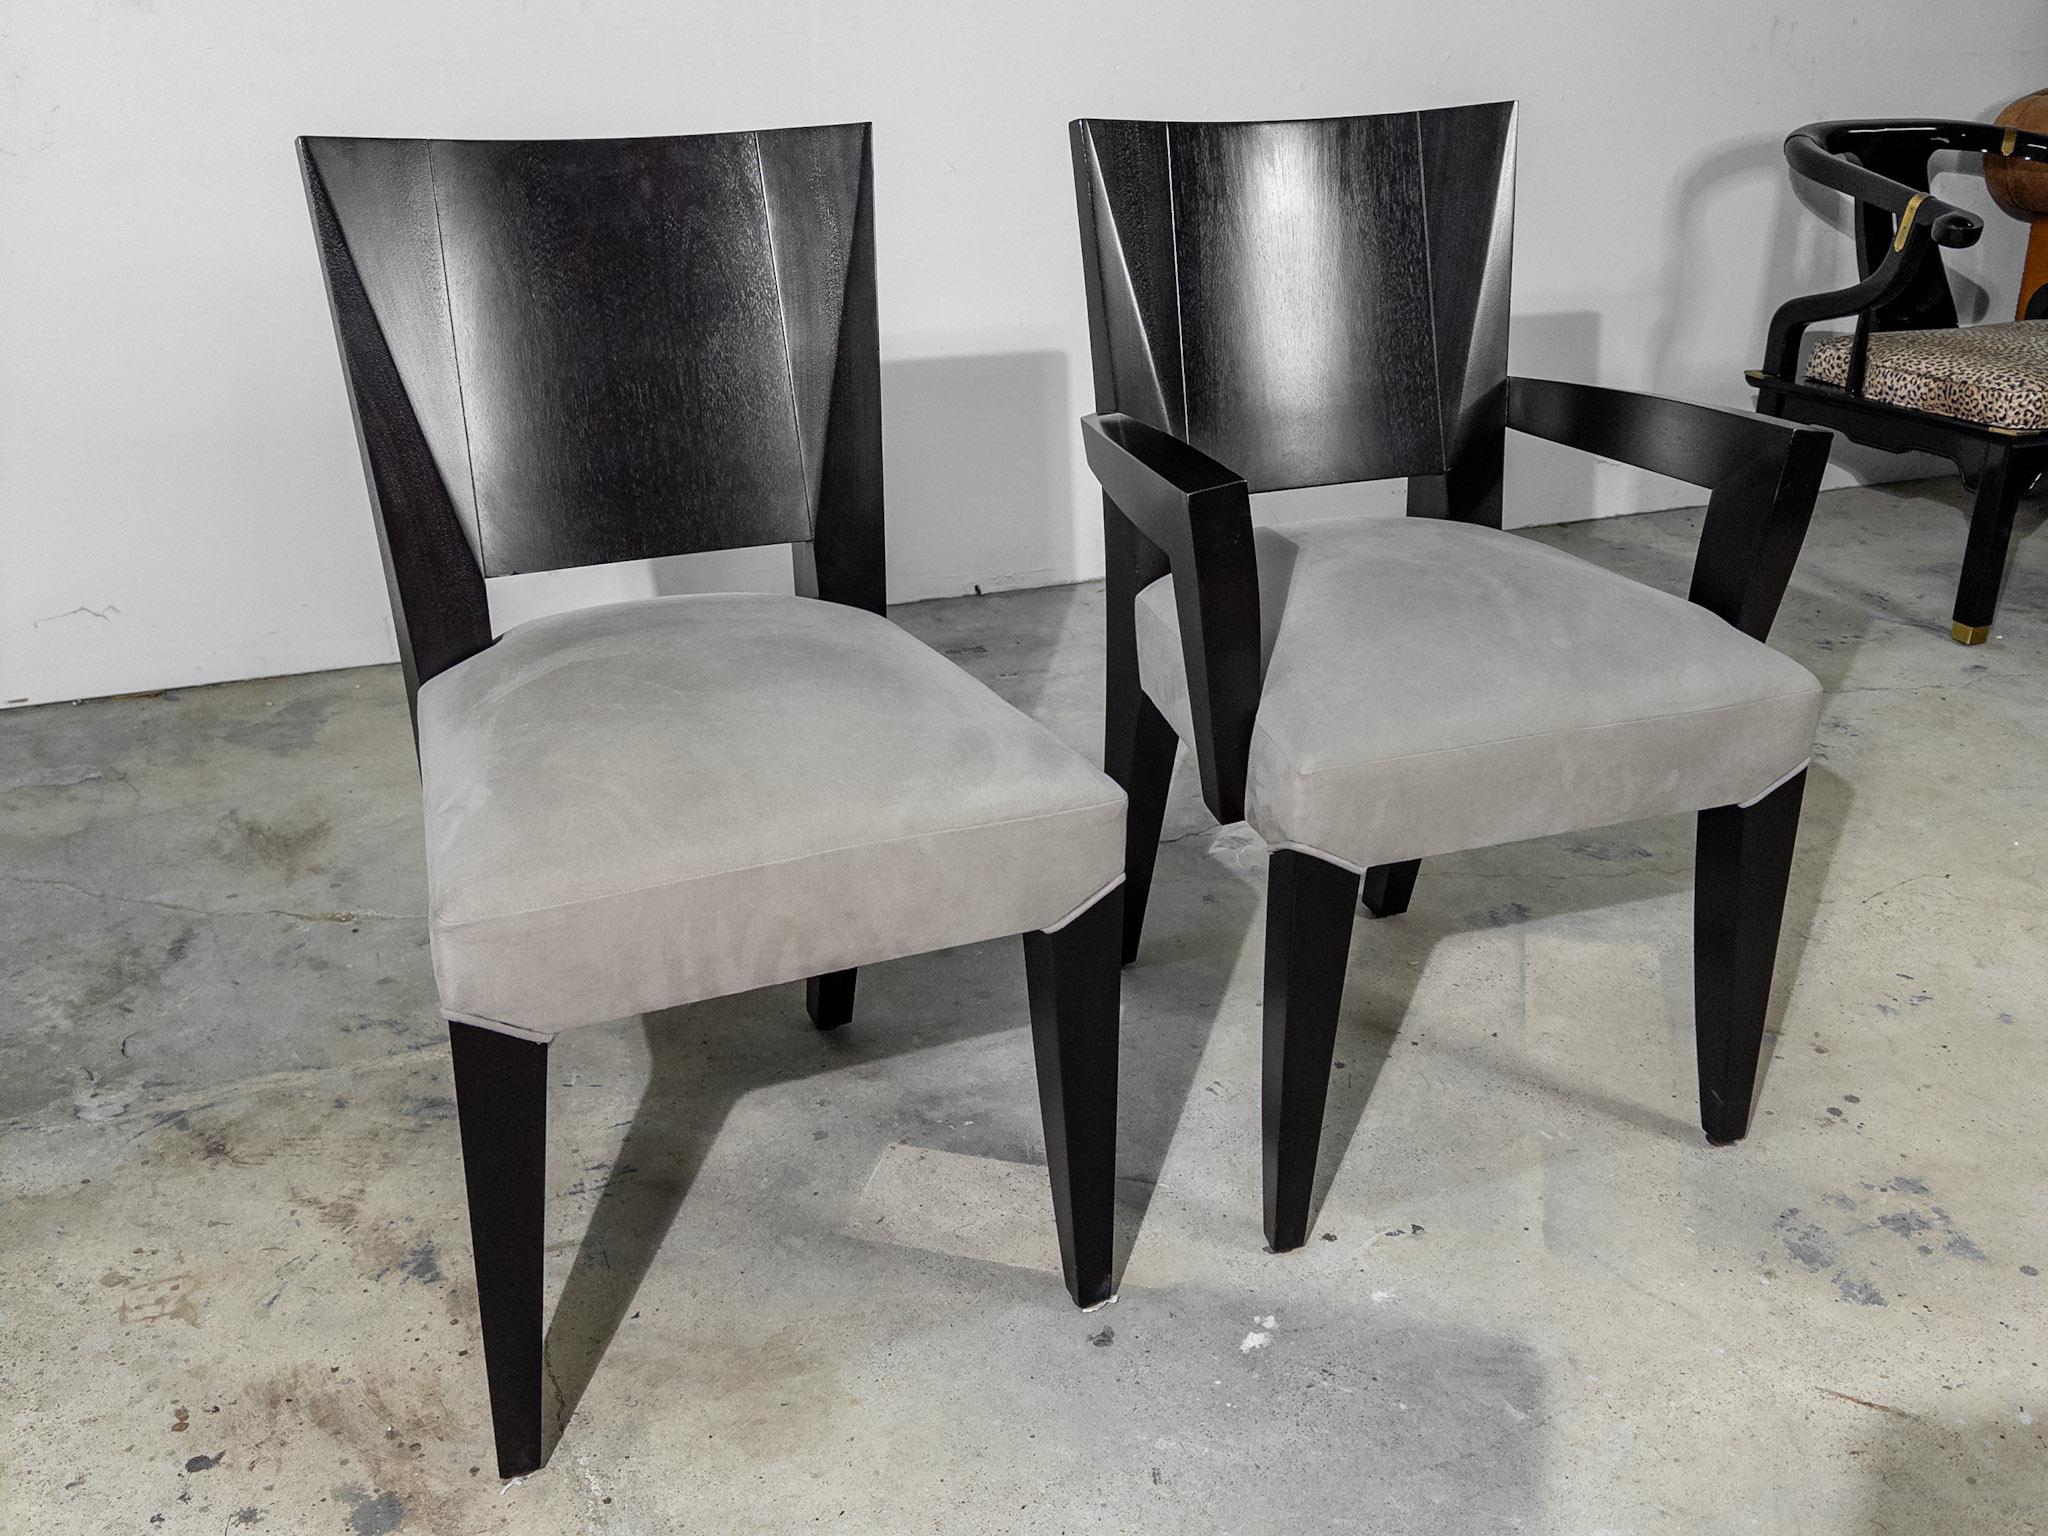 Set of 10 Ocean Dining Chairs by Dakota Jackson (2 Arm Chairs, 8 Side Chairs) In Good Condition For Sale In Houston, TX